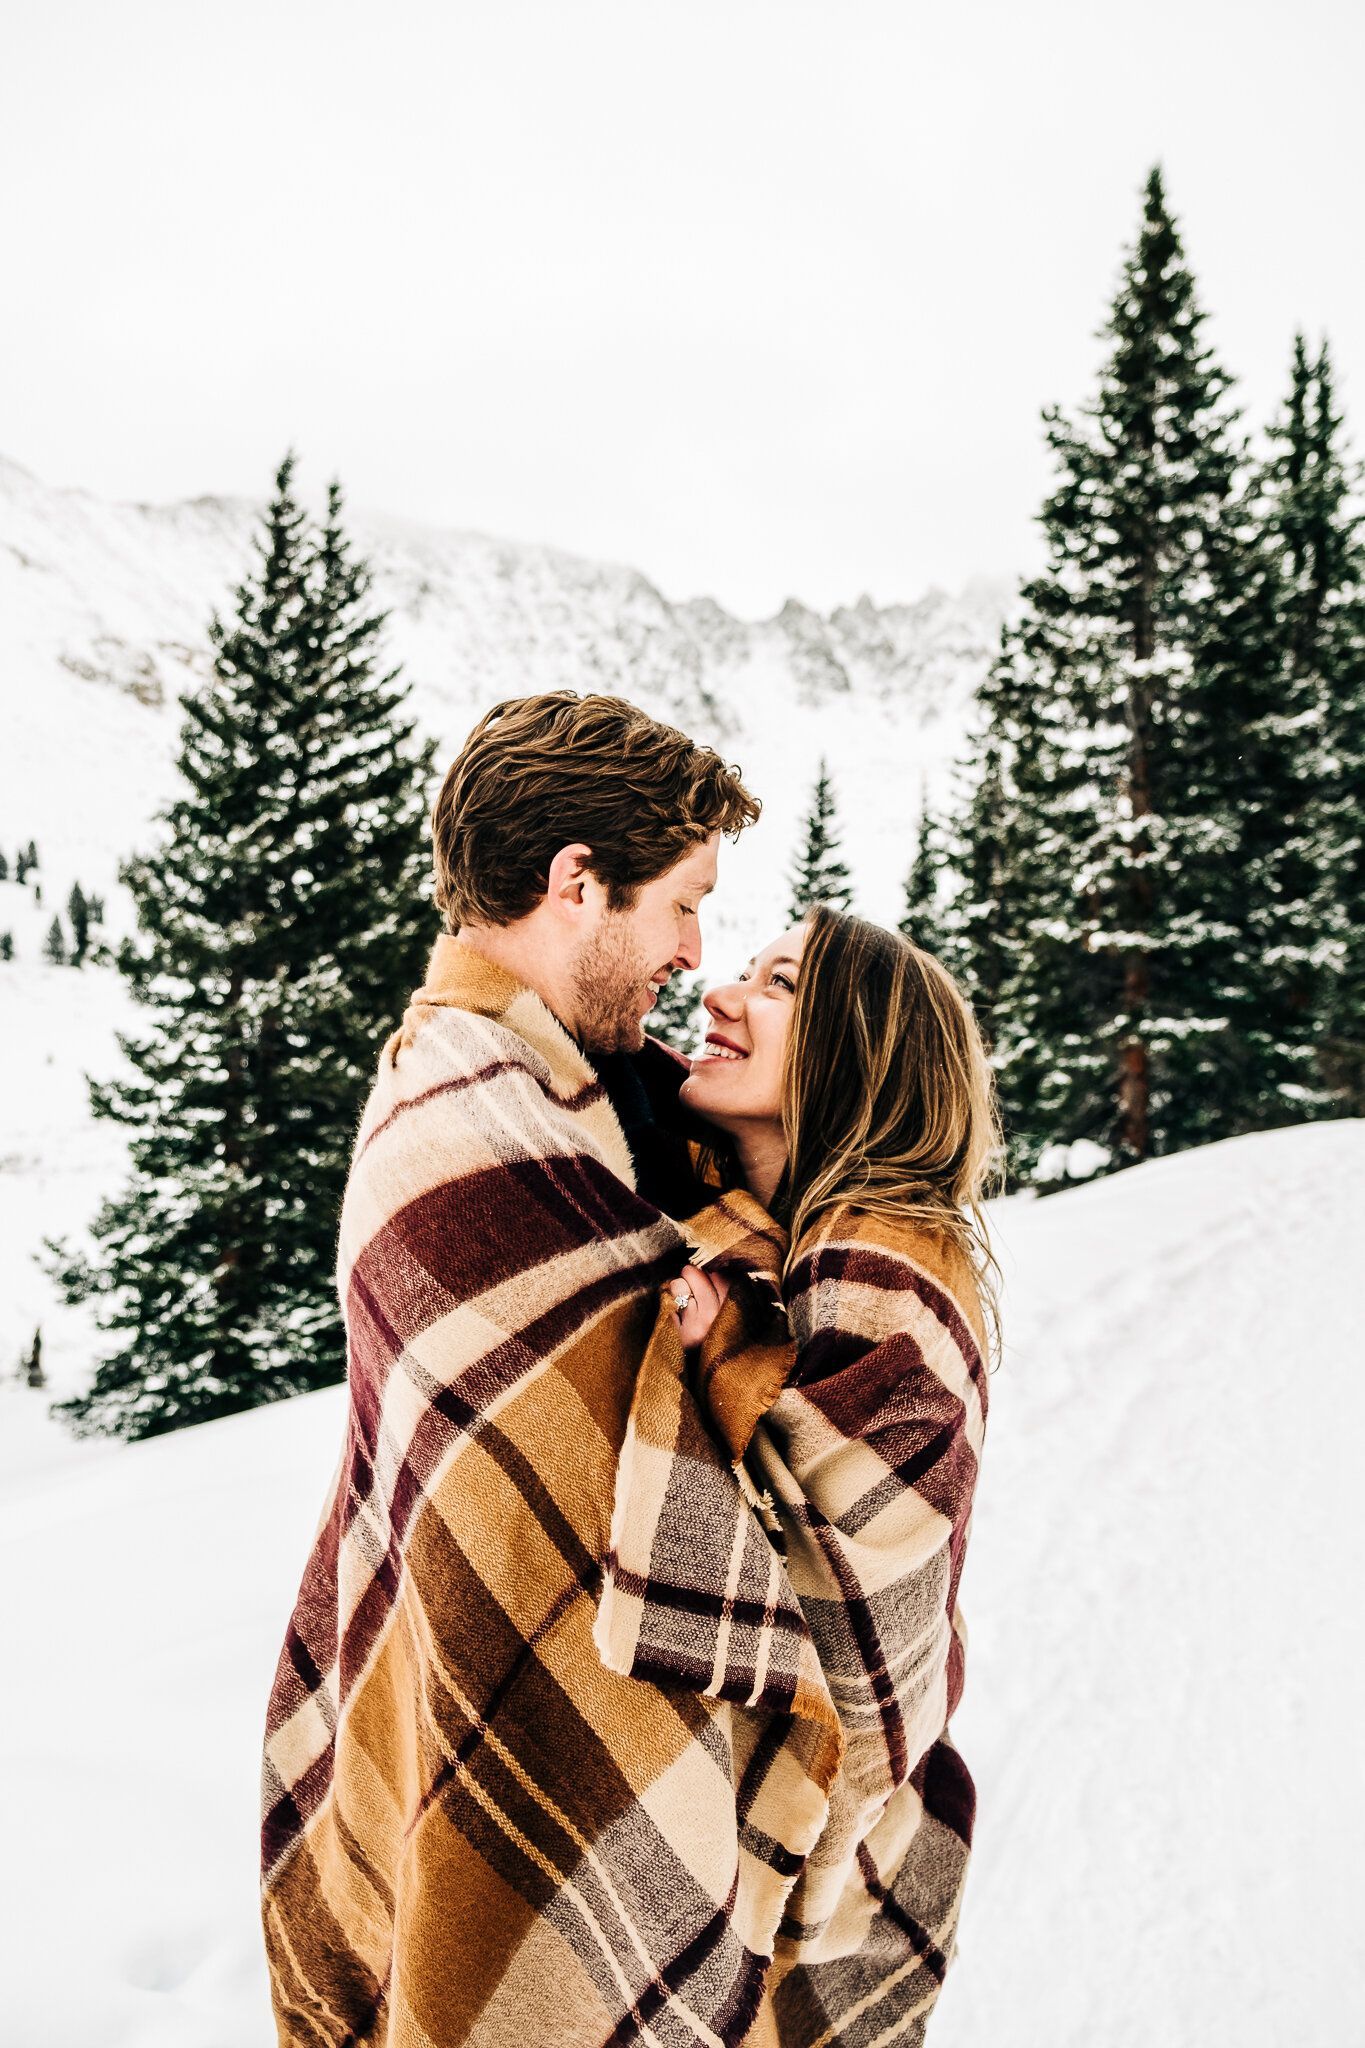 Winter Engagement Photos | Mayflower Gulch Colorado | Snowshoeing Engagement Photography | Emily + B -   18 christmas photoshoot couples ideas